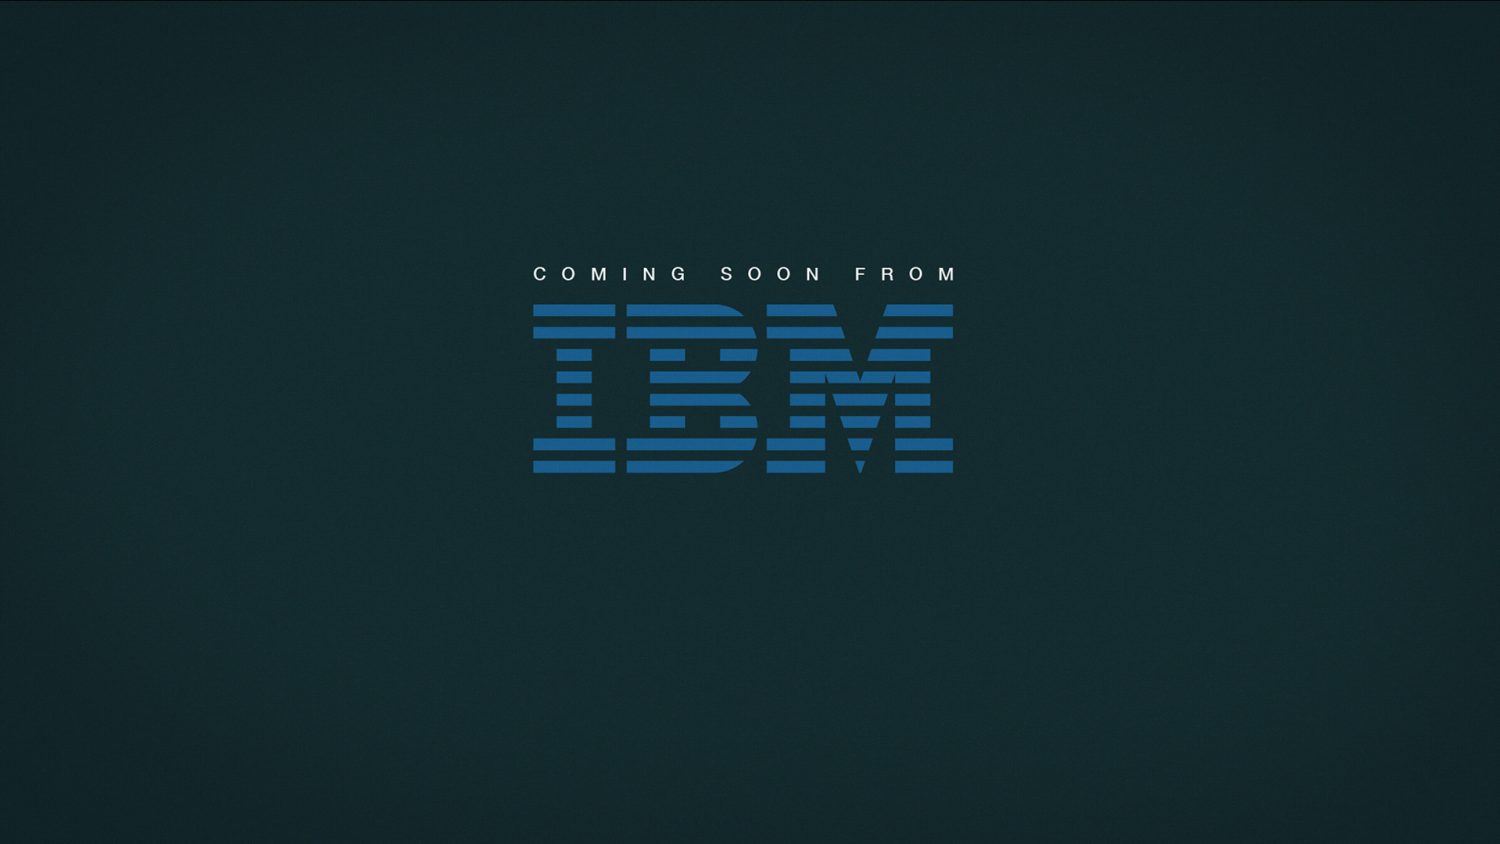 Le texte IBM coming soon apparaît